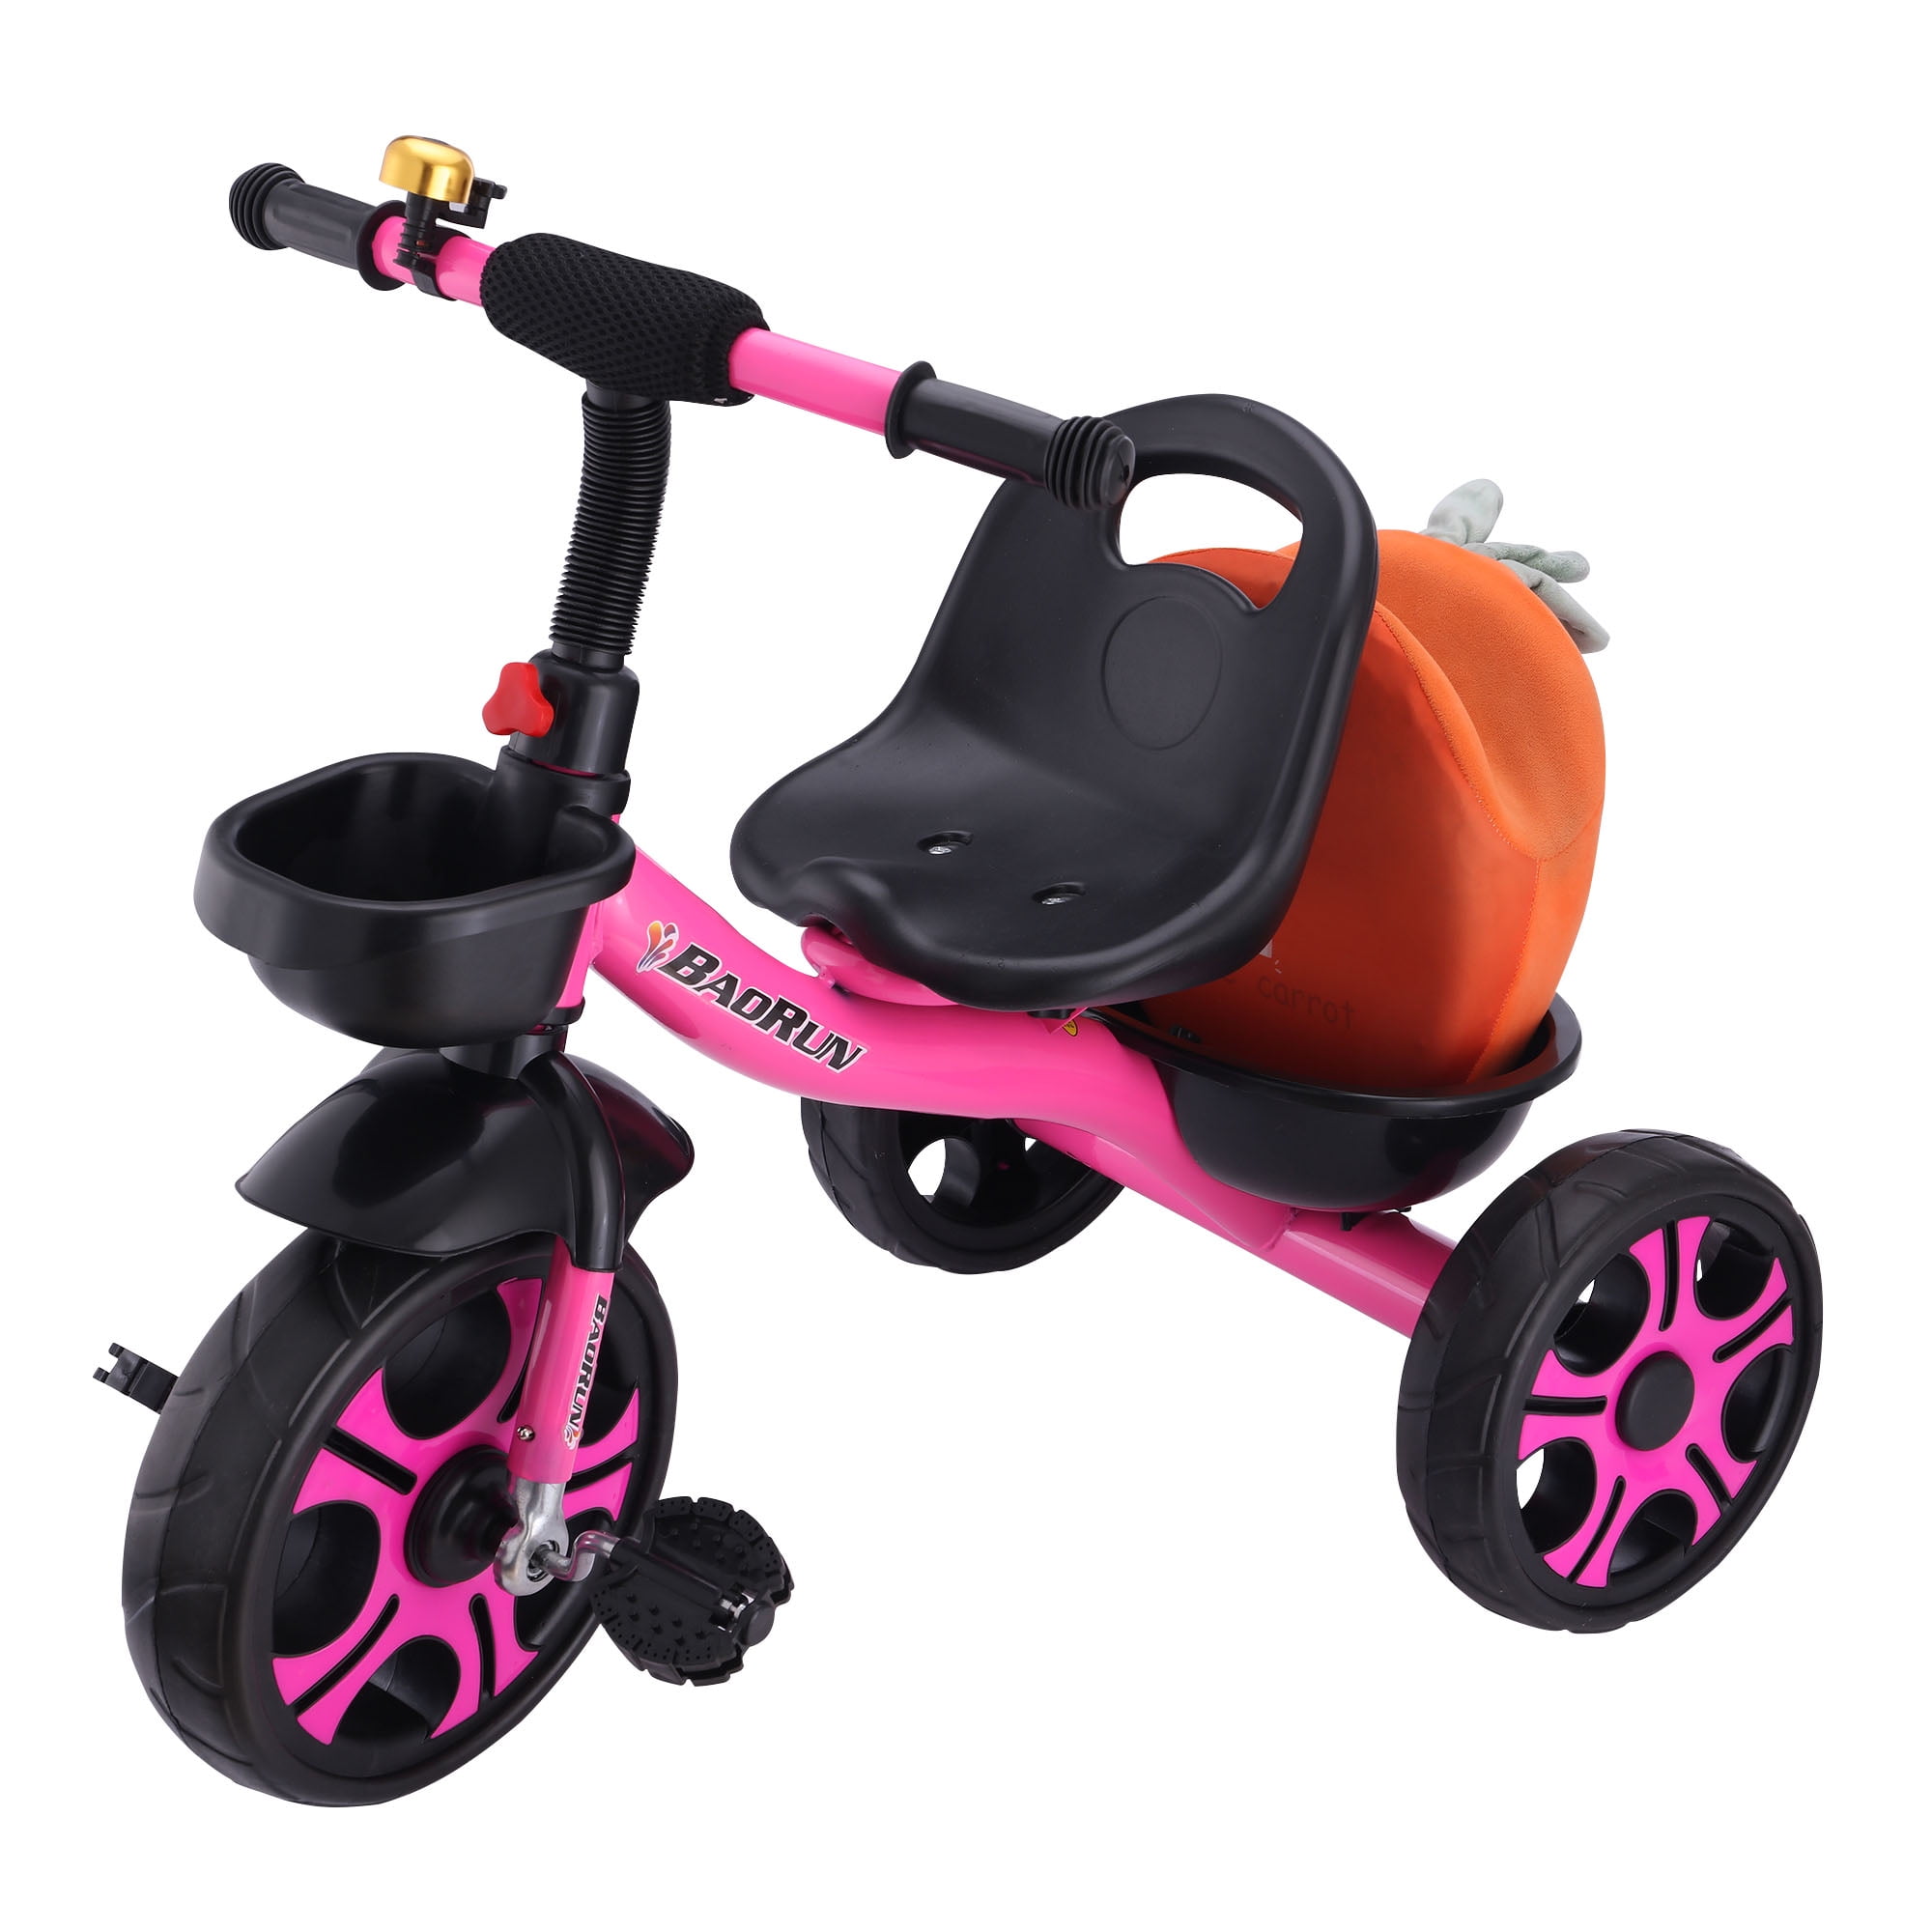 Tricycle for Toddlers Bike for Boys and Girls Kids' Bike Trike ...